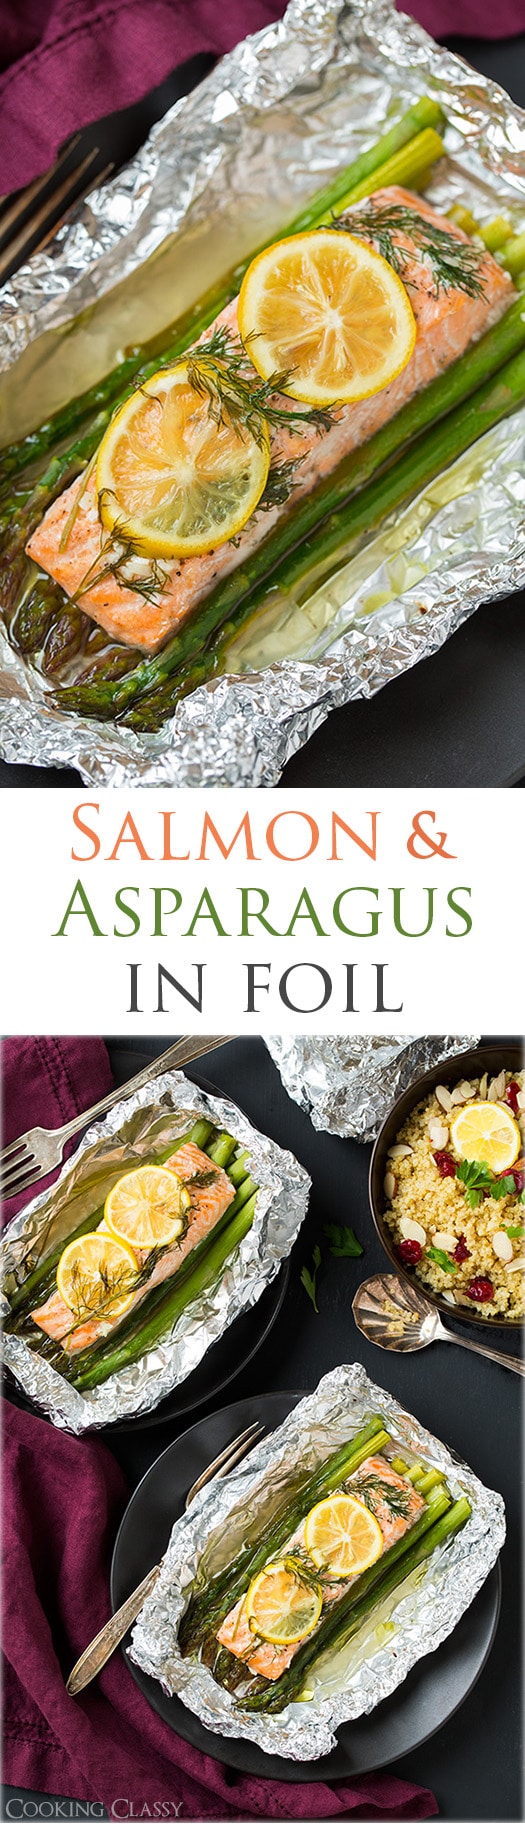 Baked Salmon in Foil (with Asparagus) - Cooking Classy